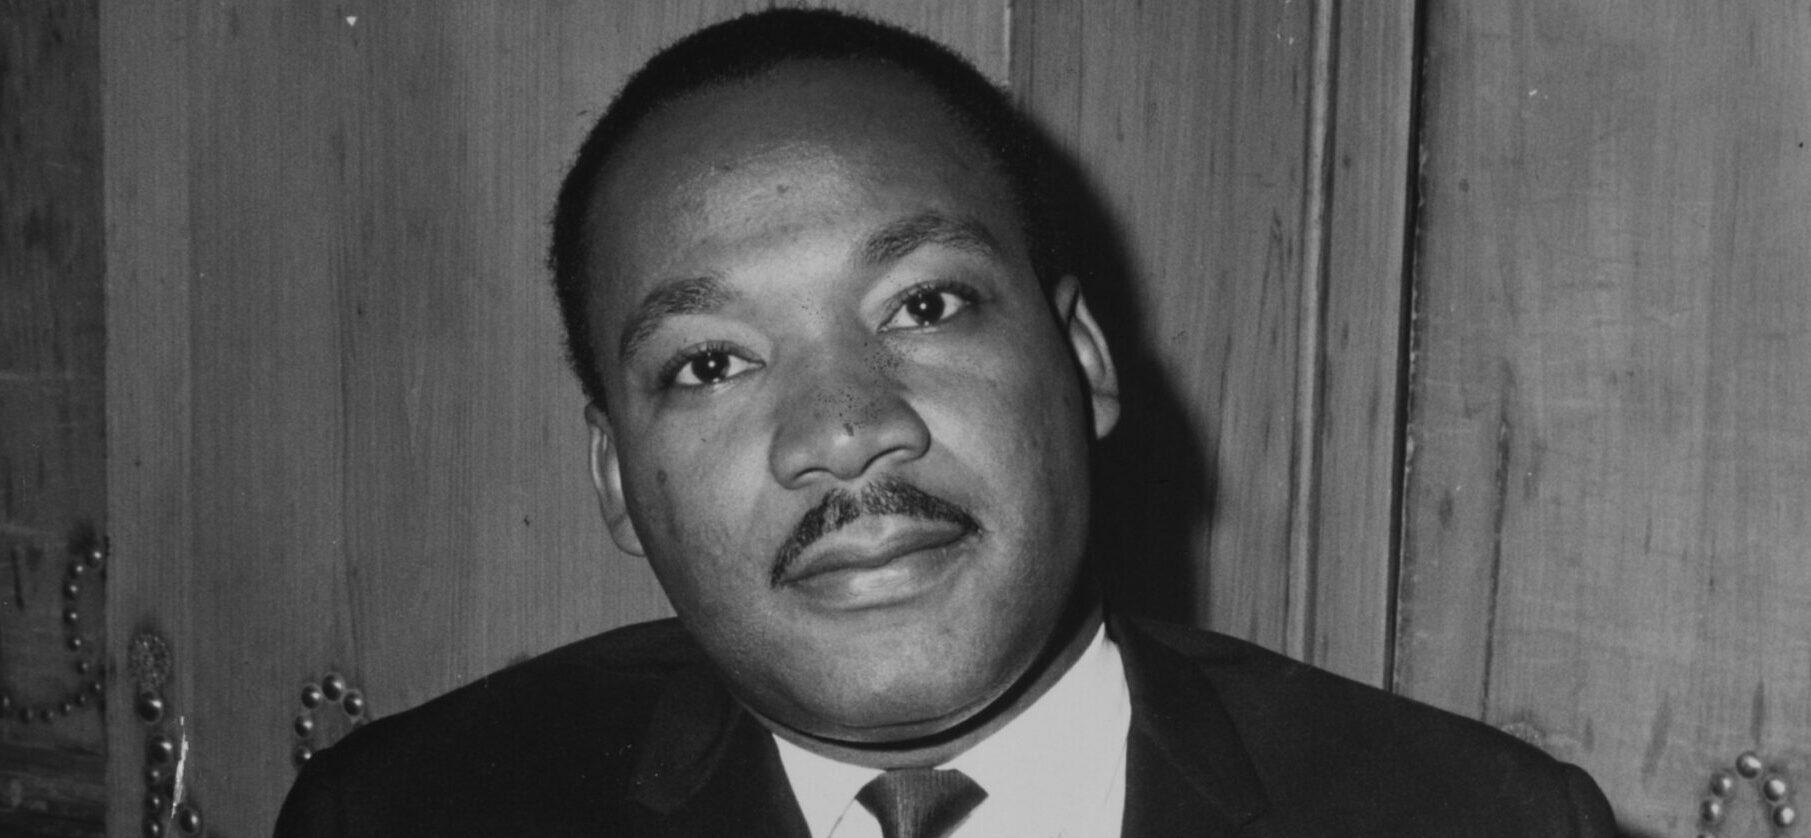 Civil rights campaigner Martin Luther King at a press conference at The Savoy launching the British version of his book on the civil rights struggle in America "Why we can't wait".